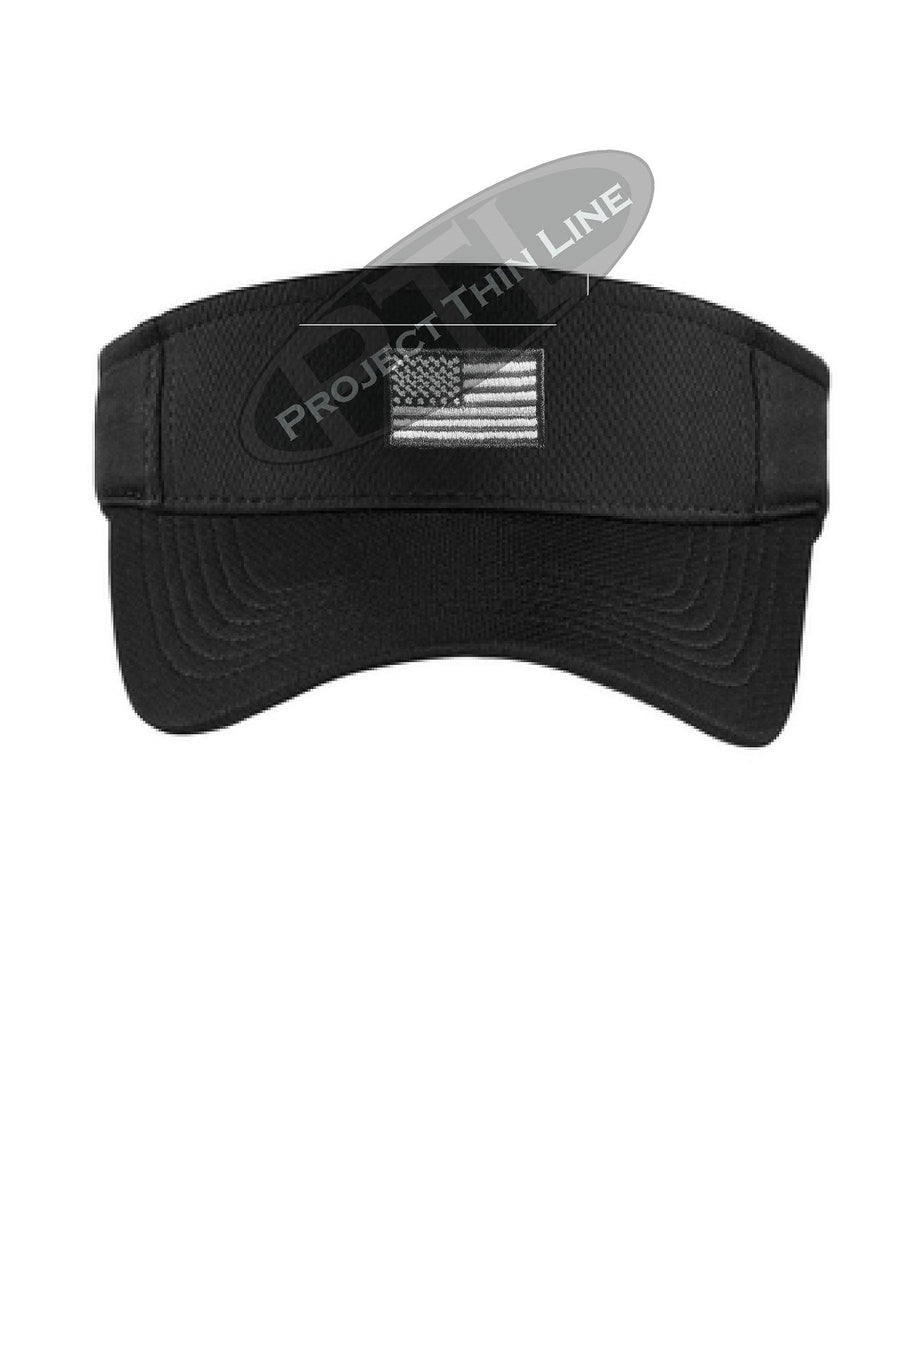 Embroidered Tactical Line Subdued American Flag Visor